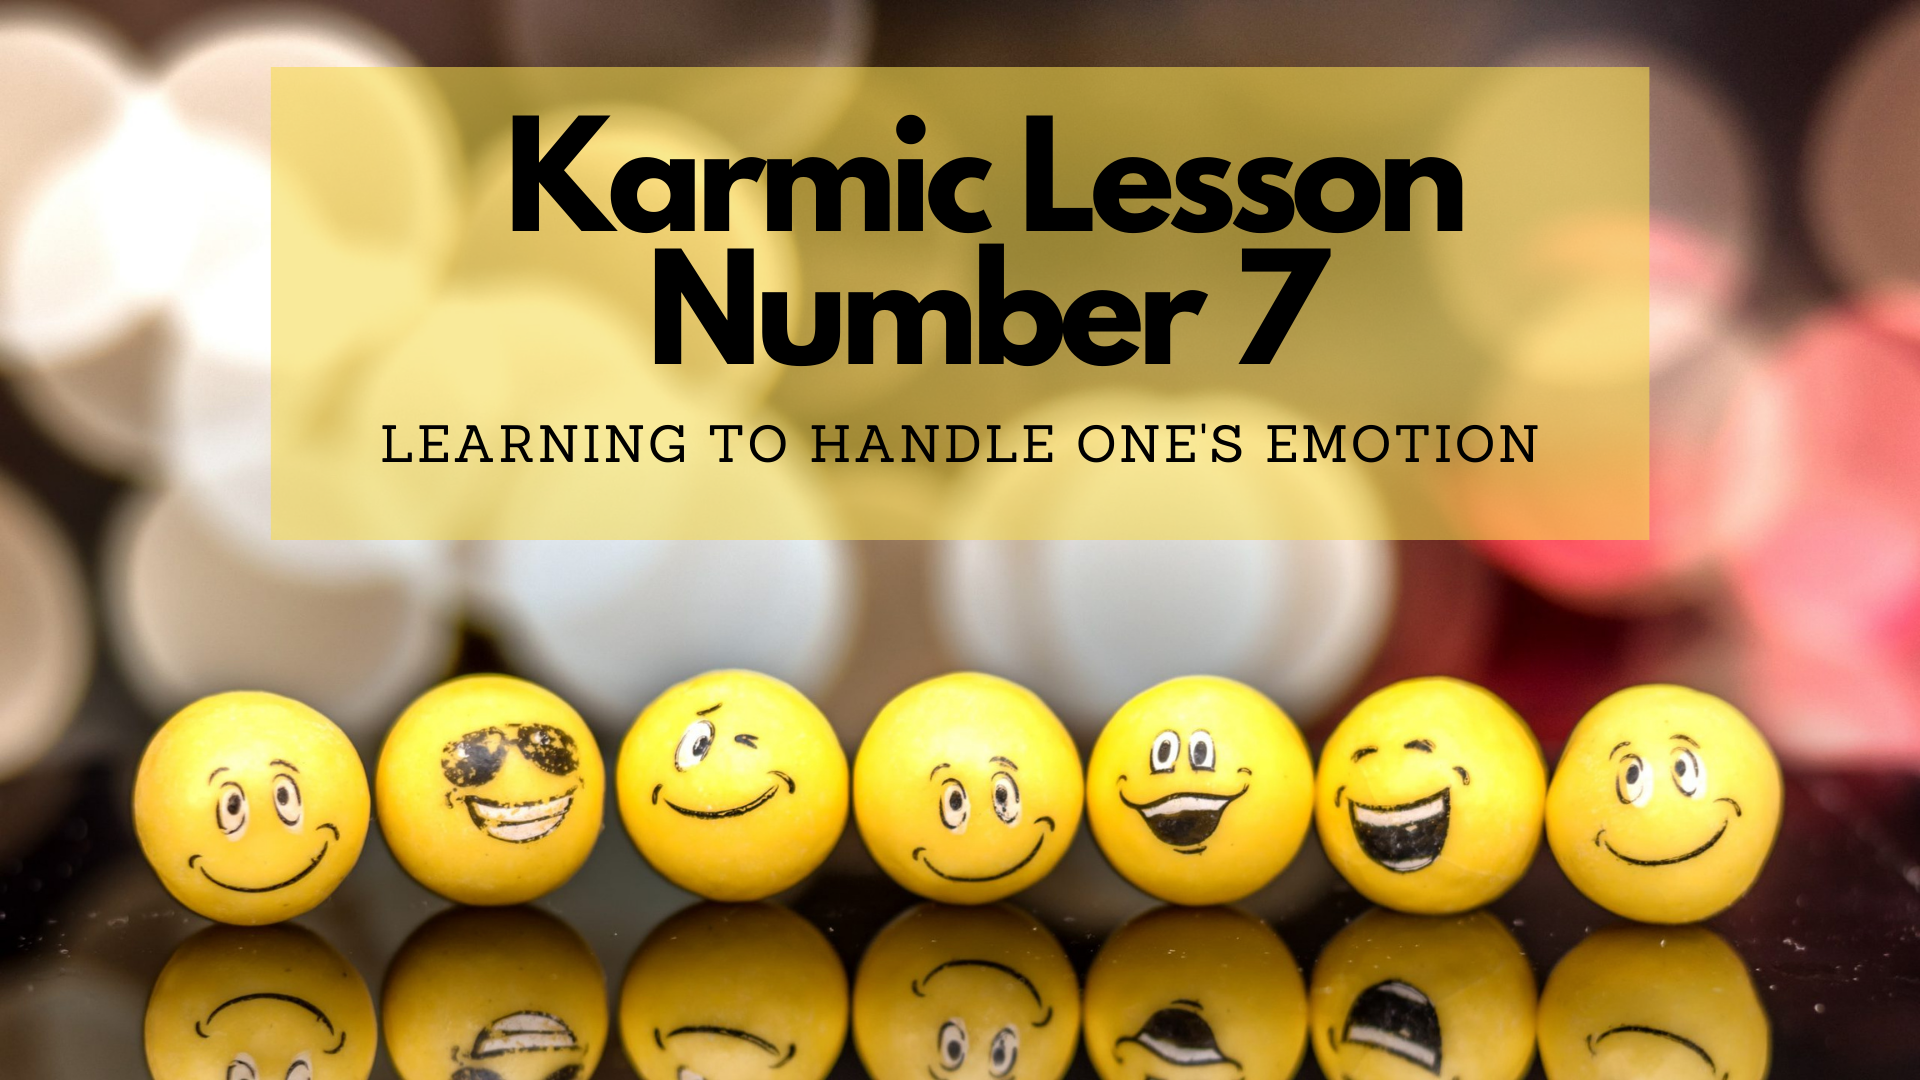 Karmic Lesson Number 7 -  Learning To Handle One's Emotion